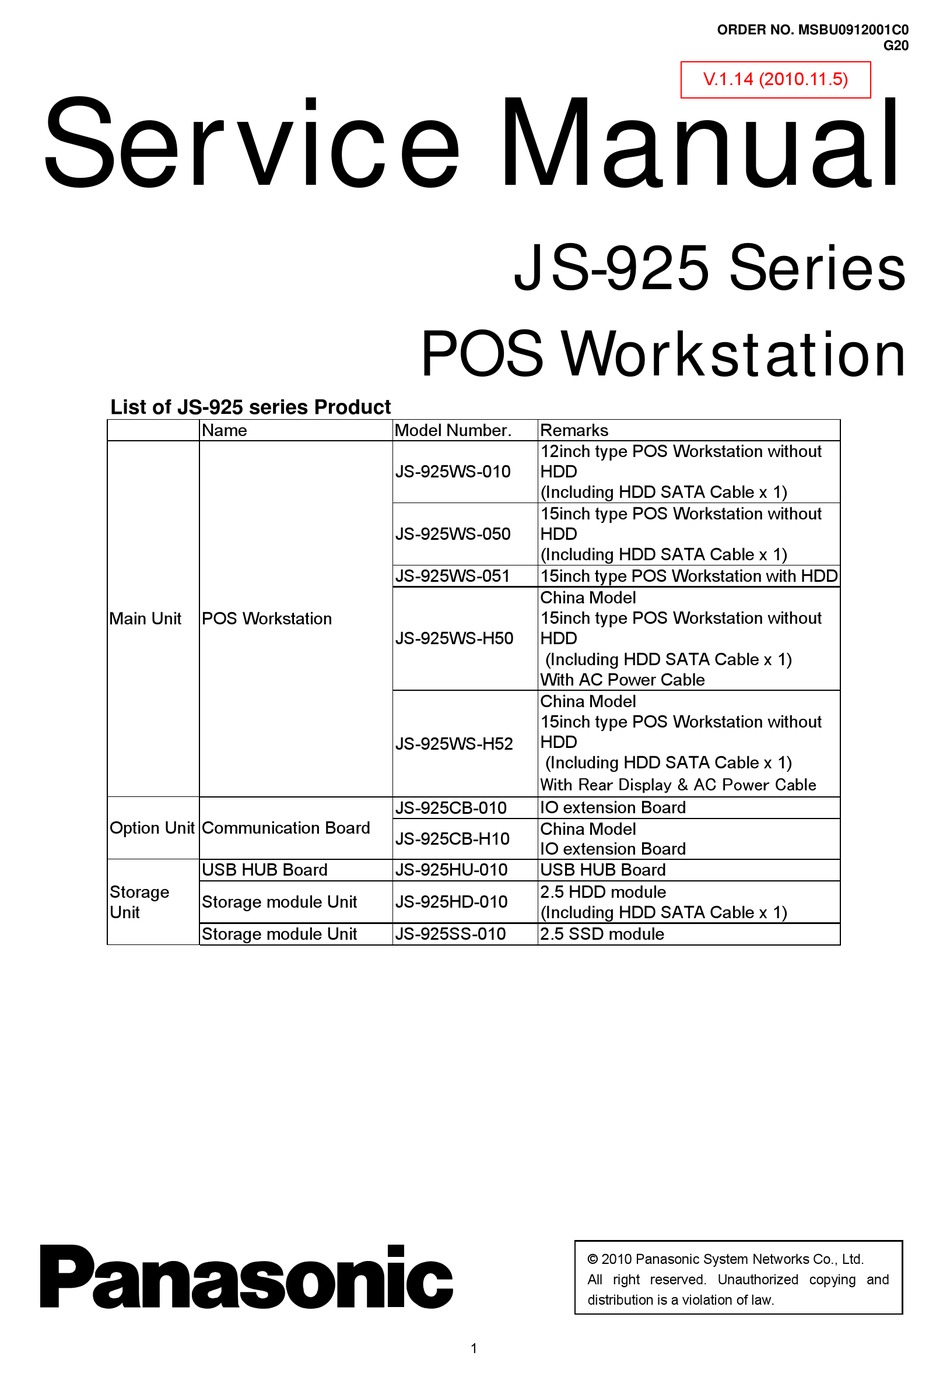 panasonic JS-925WS Touch Screen Point Of Sale 